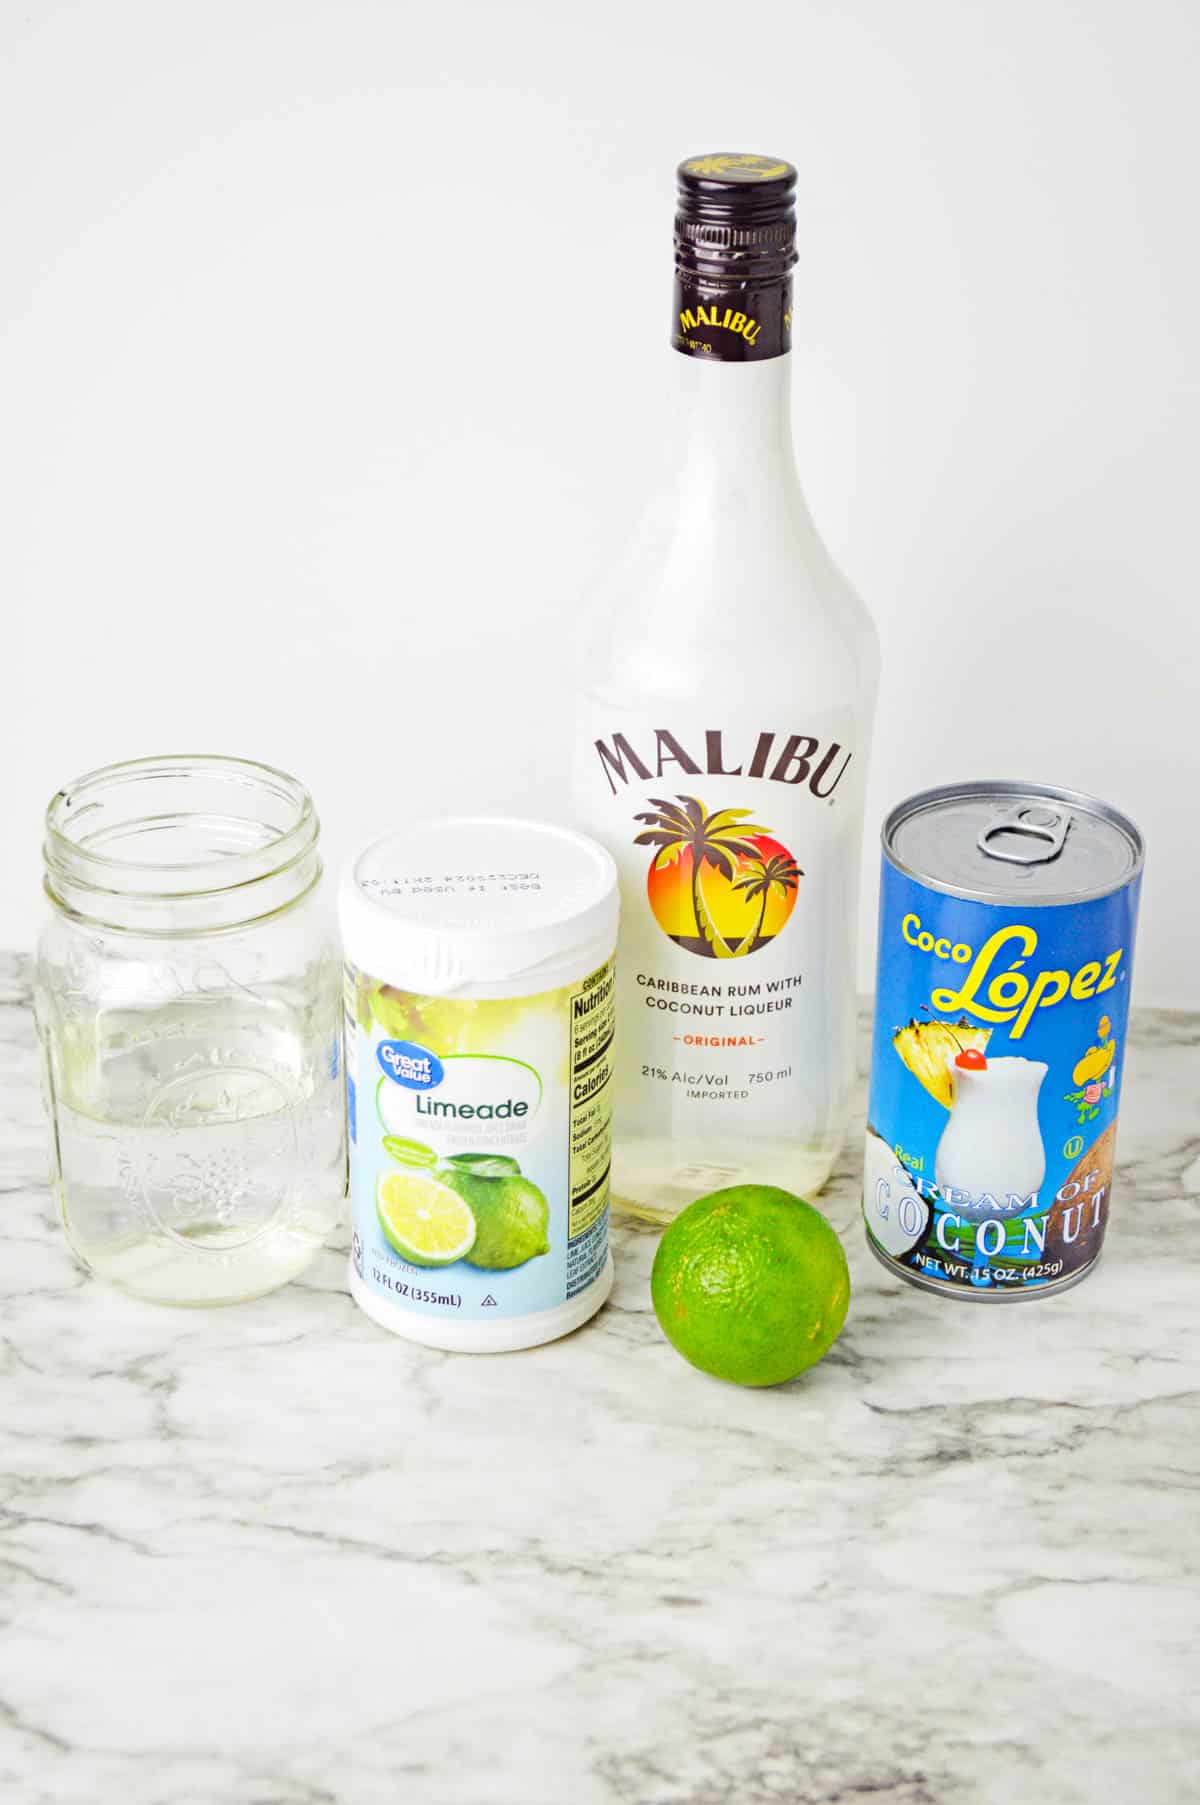 Coconut daiquiri ingredients on a countertop.